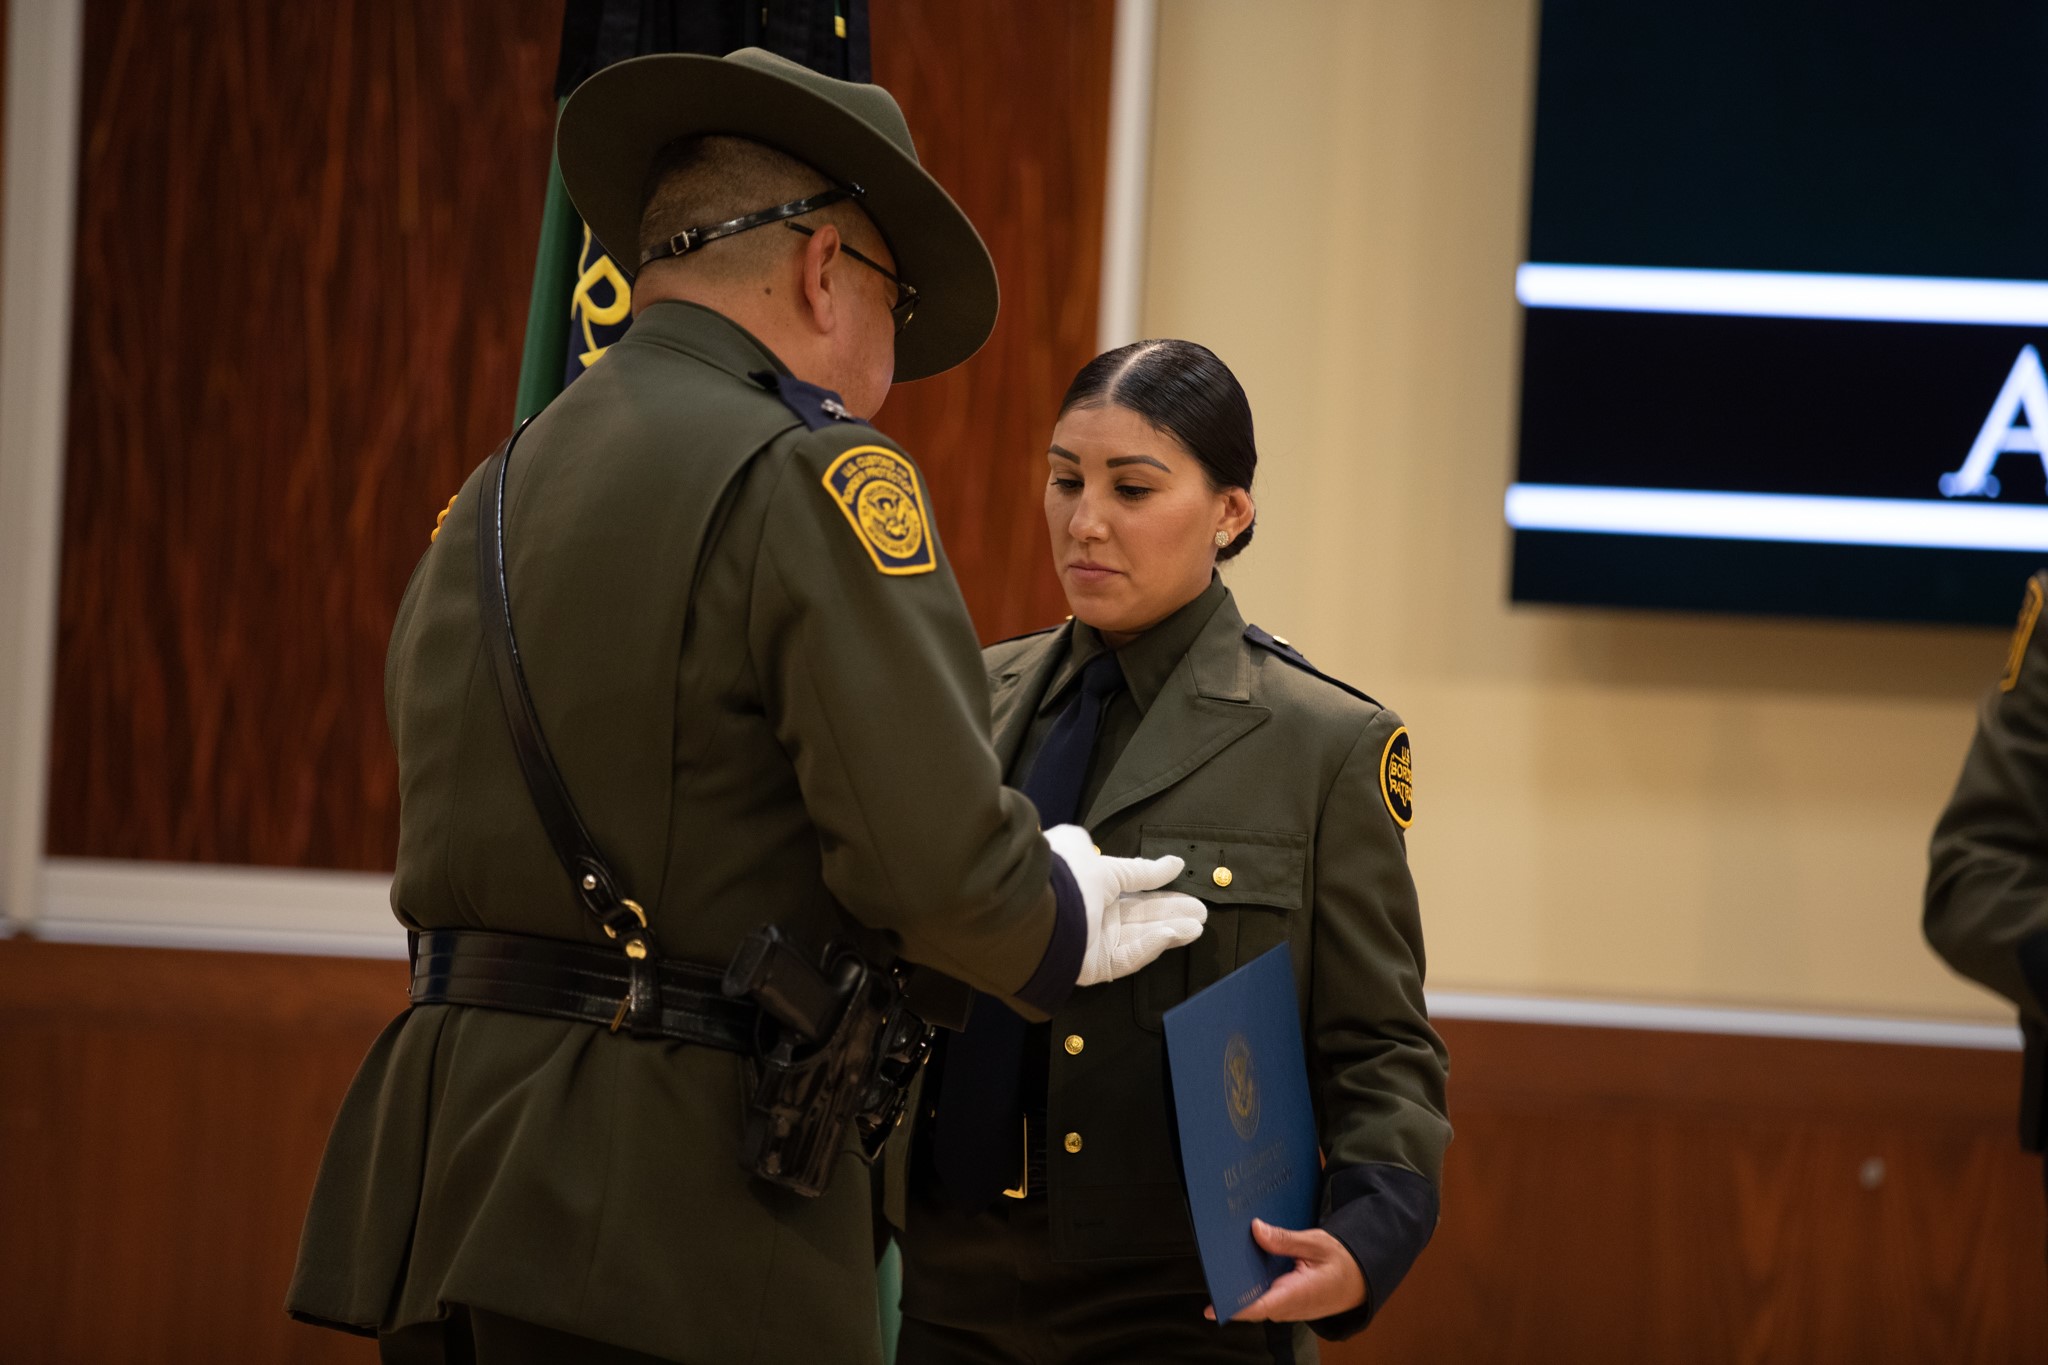 A Border Patrol agent receives her badge during graduation from the Border Patrol Academy.